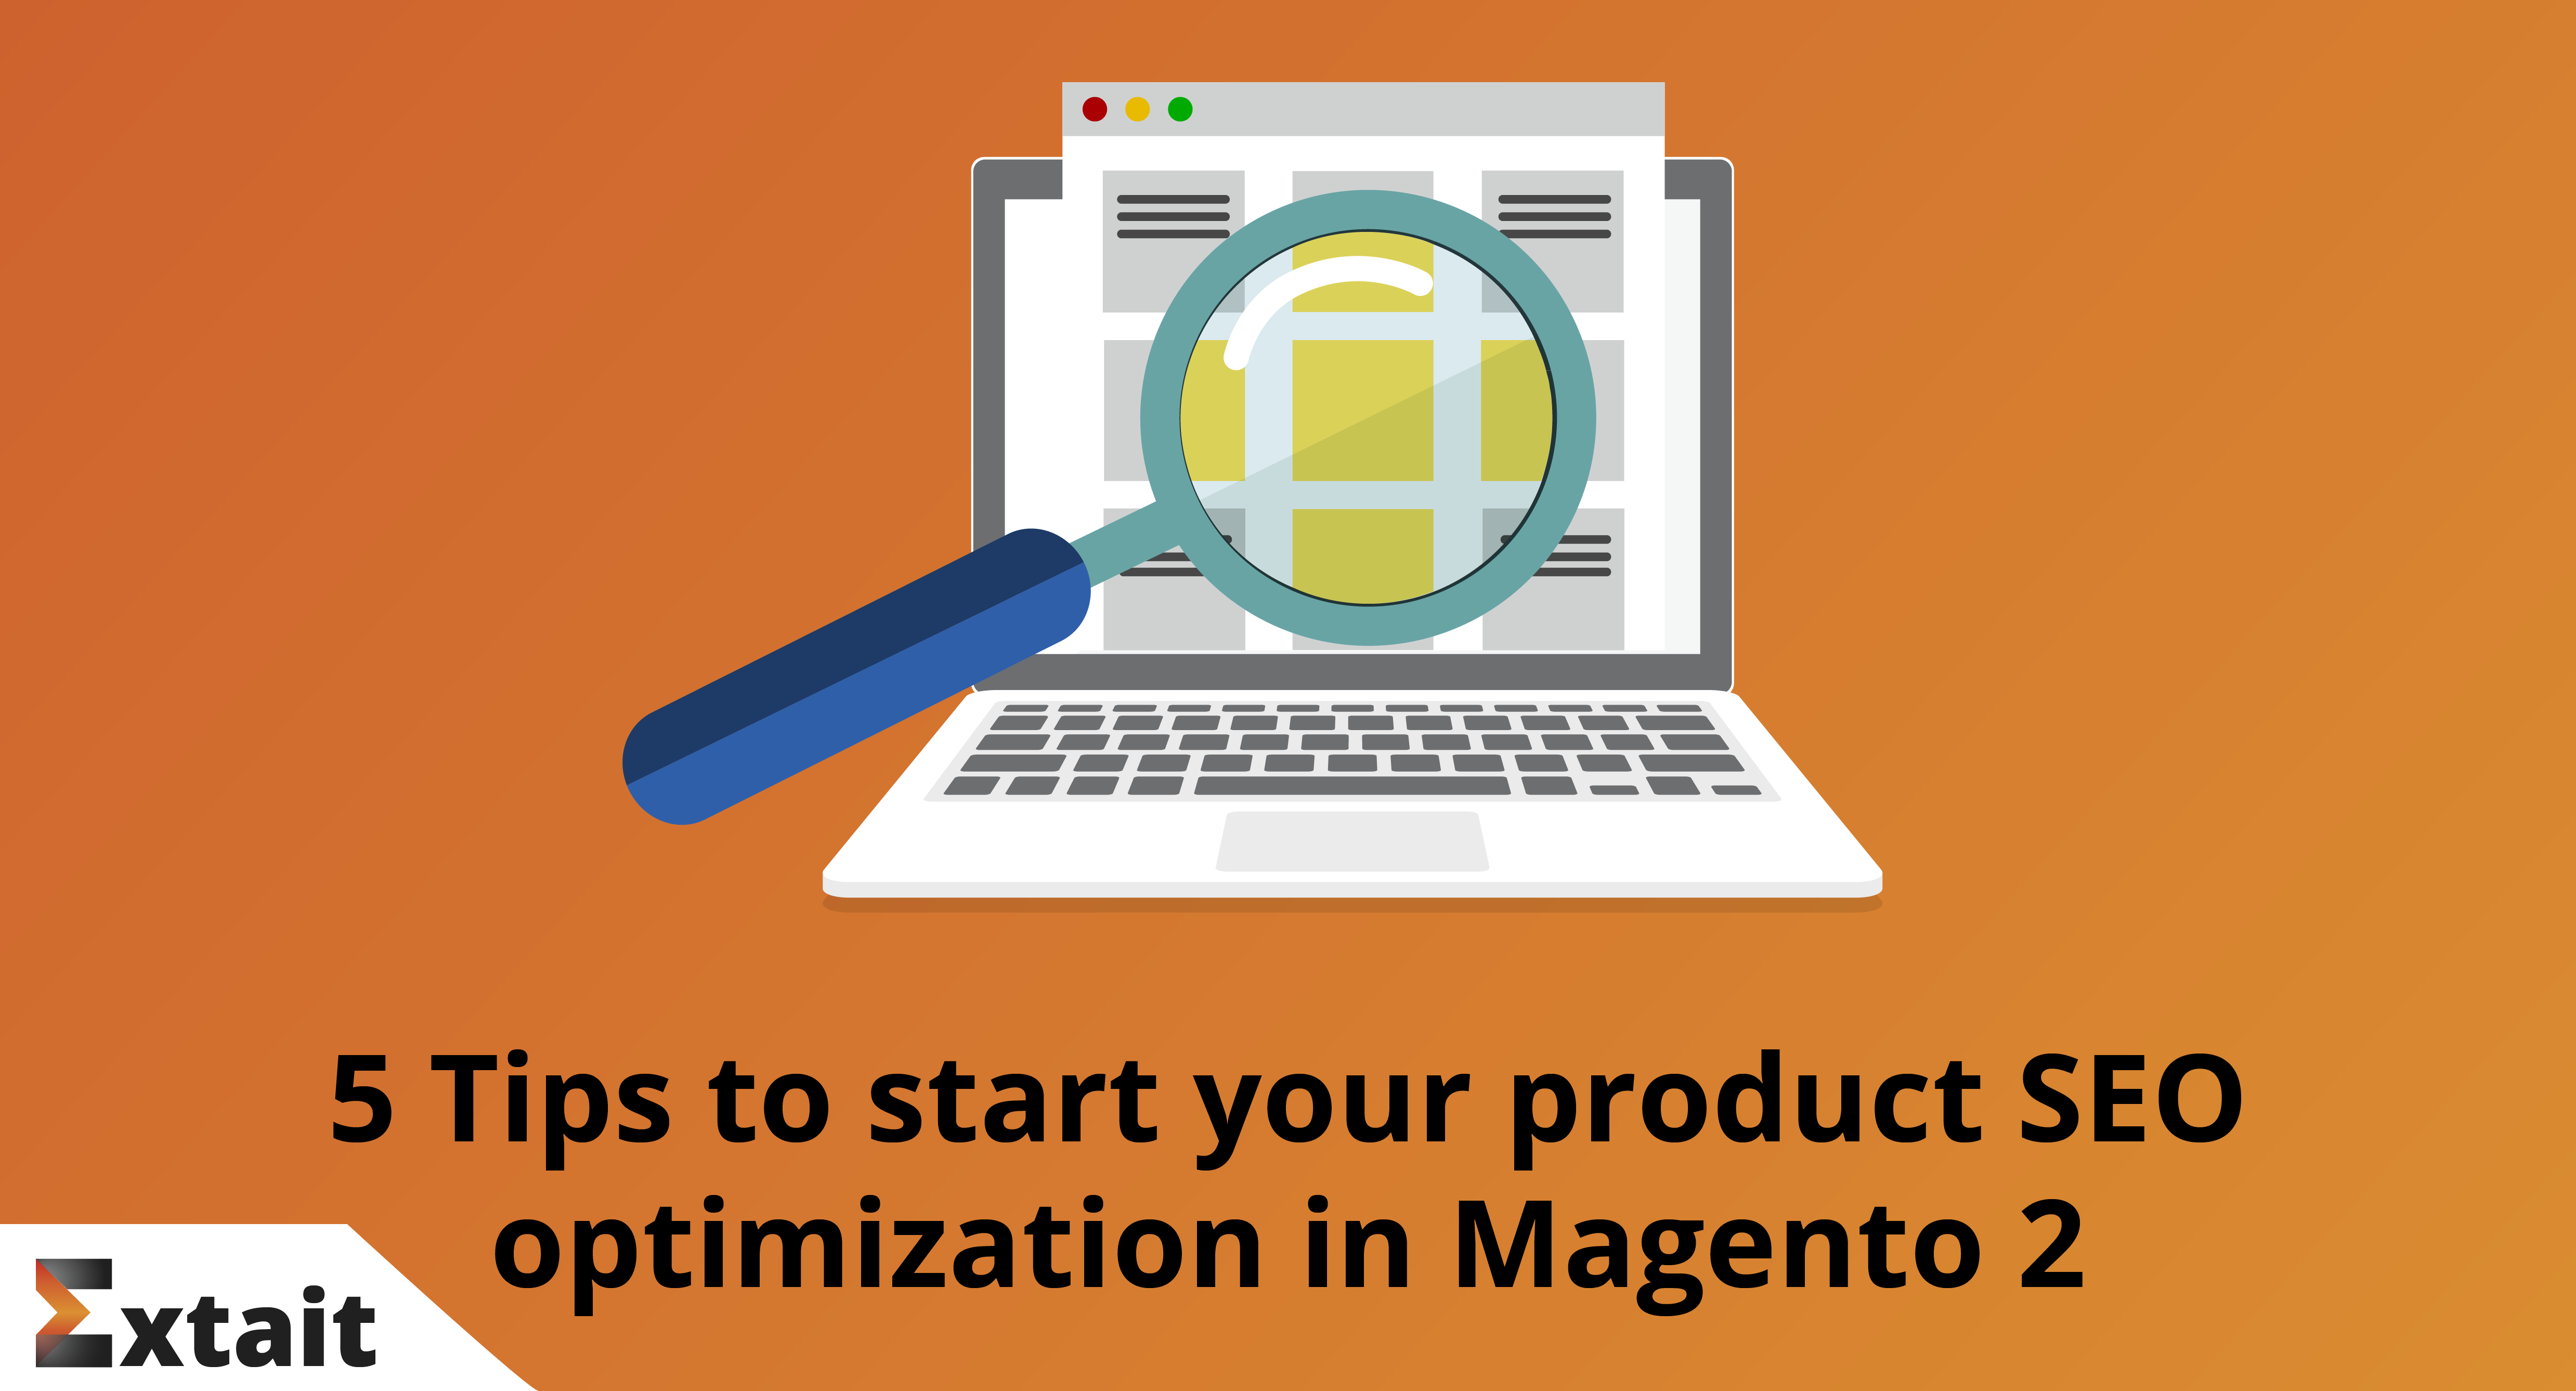 5 Tips to start your product SEO optimization in Magento 2